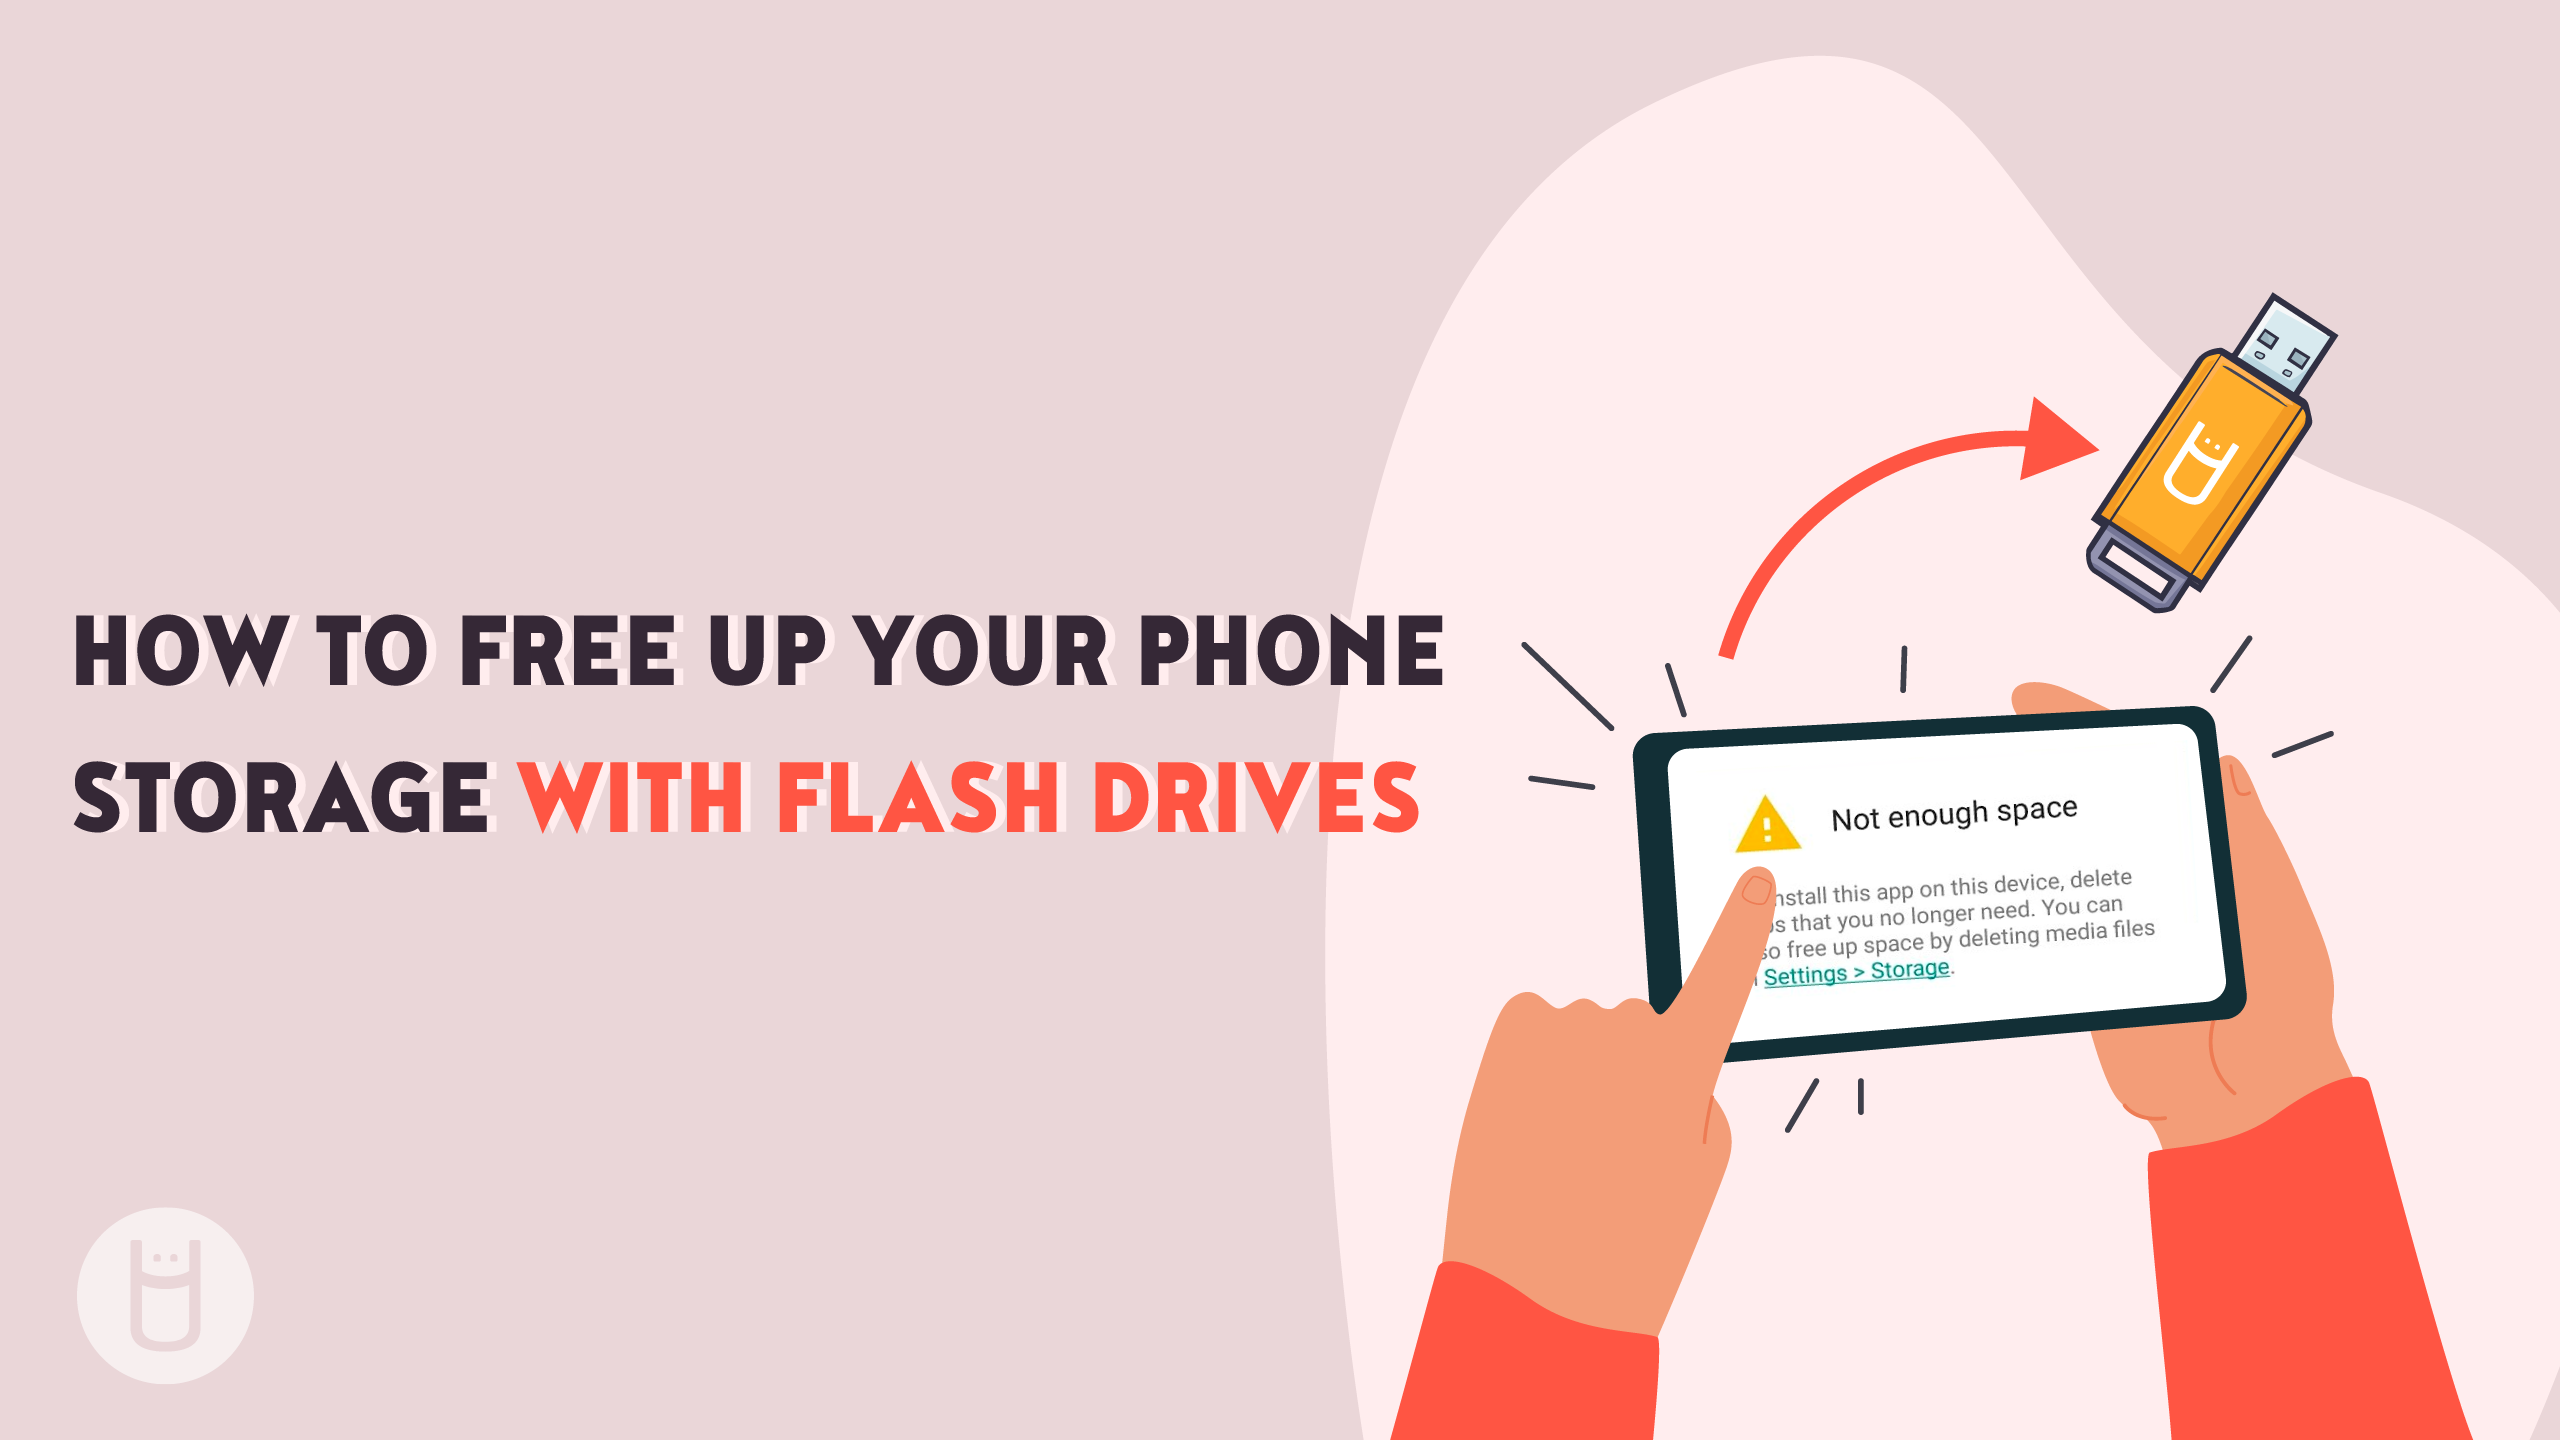 Free up phone storage with flash drives blog